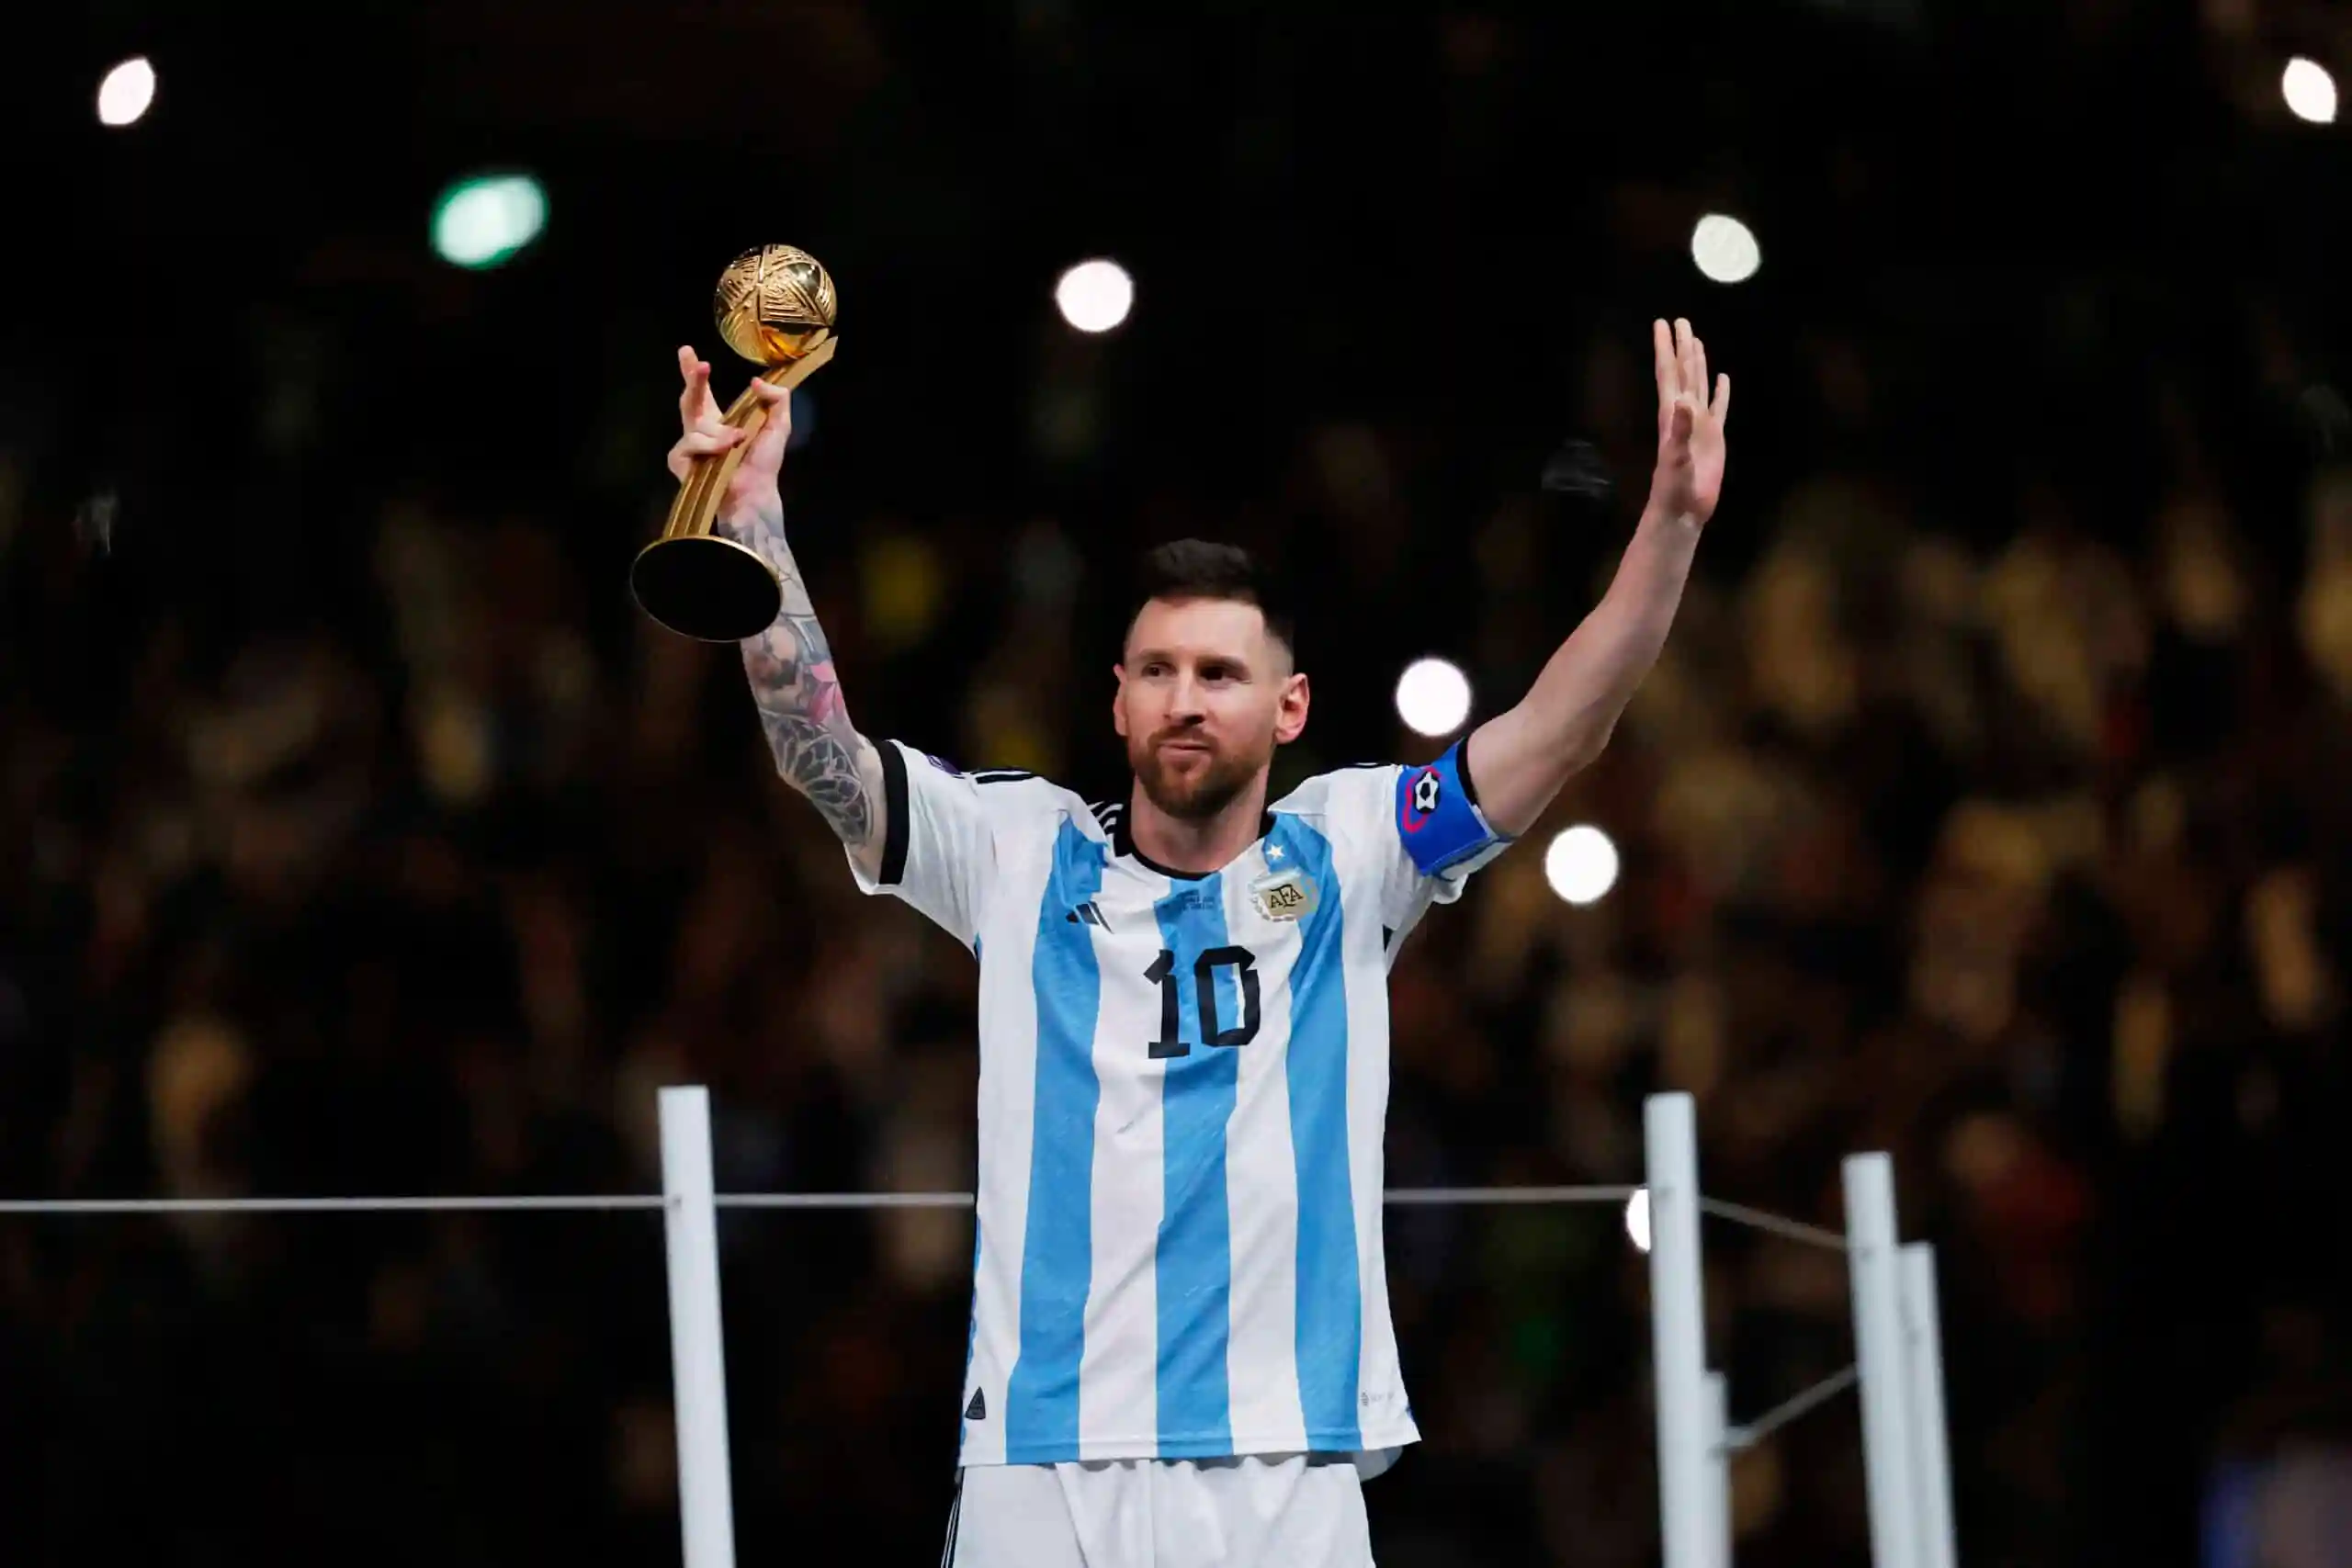 sokapro-What will Lionel Messi the World's greatest footballer be doing during his two-month break?